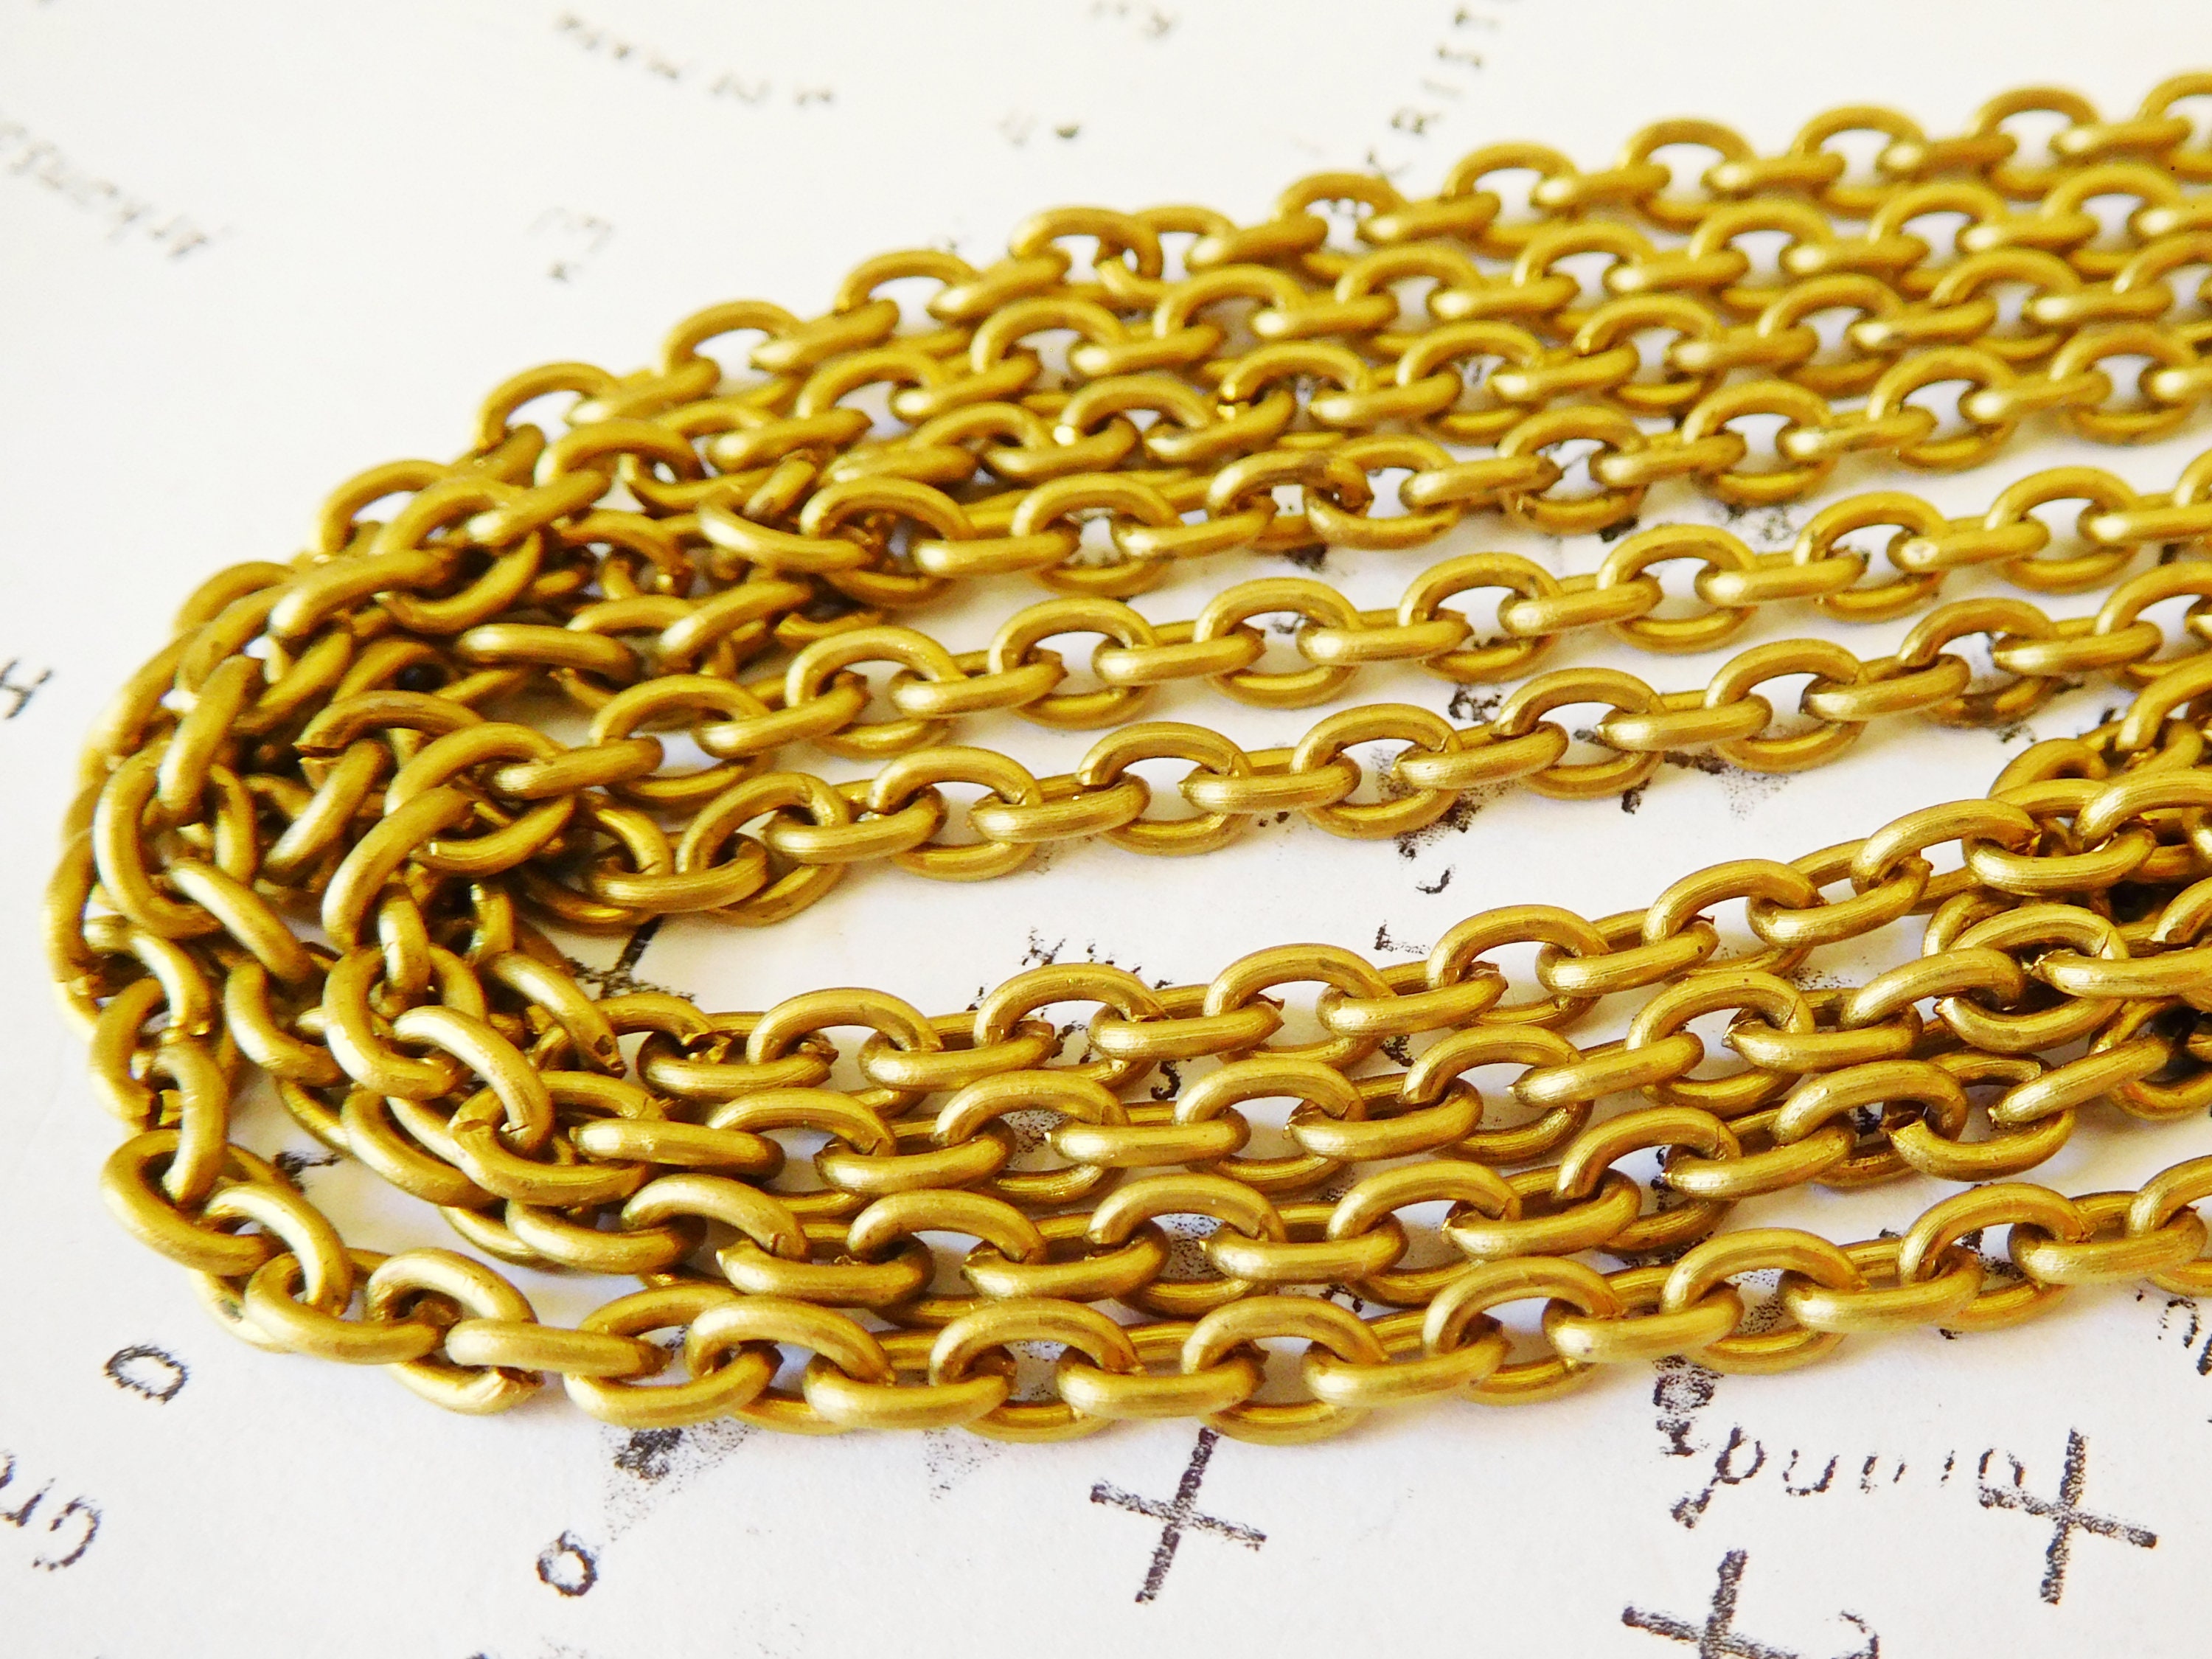 Quality Brass Chain Necklace, Nickel & Lead Free, Soldered Links, Custom Length, Raw Solid Brass Plain Chain Necklace